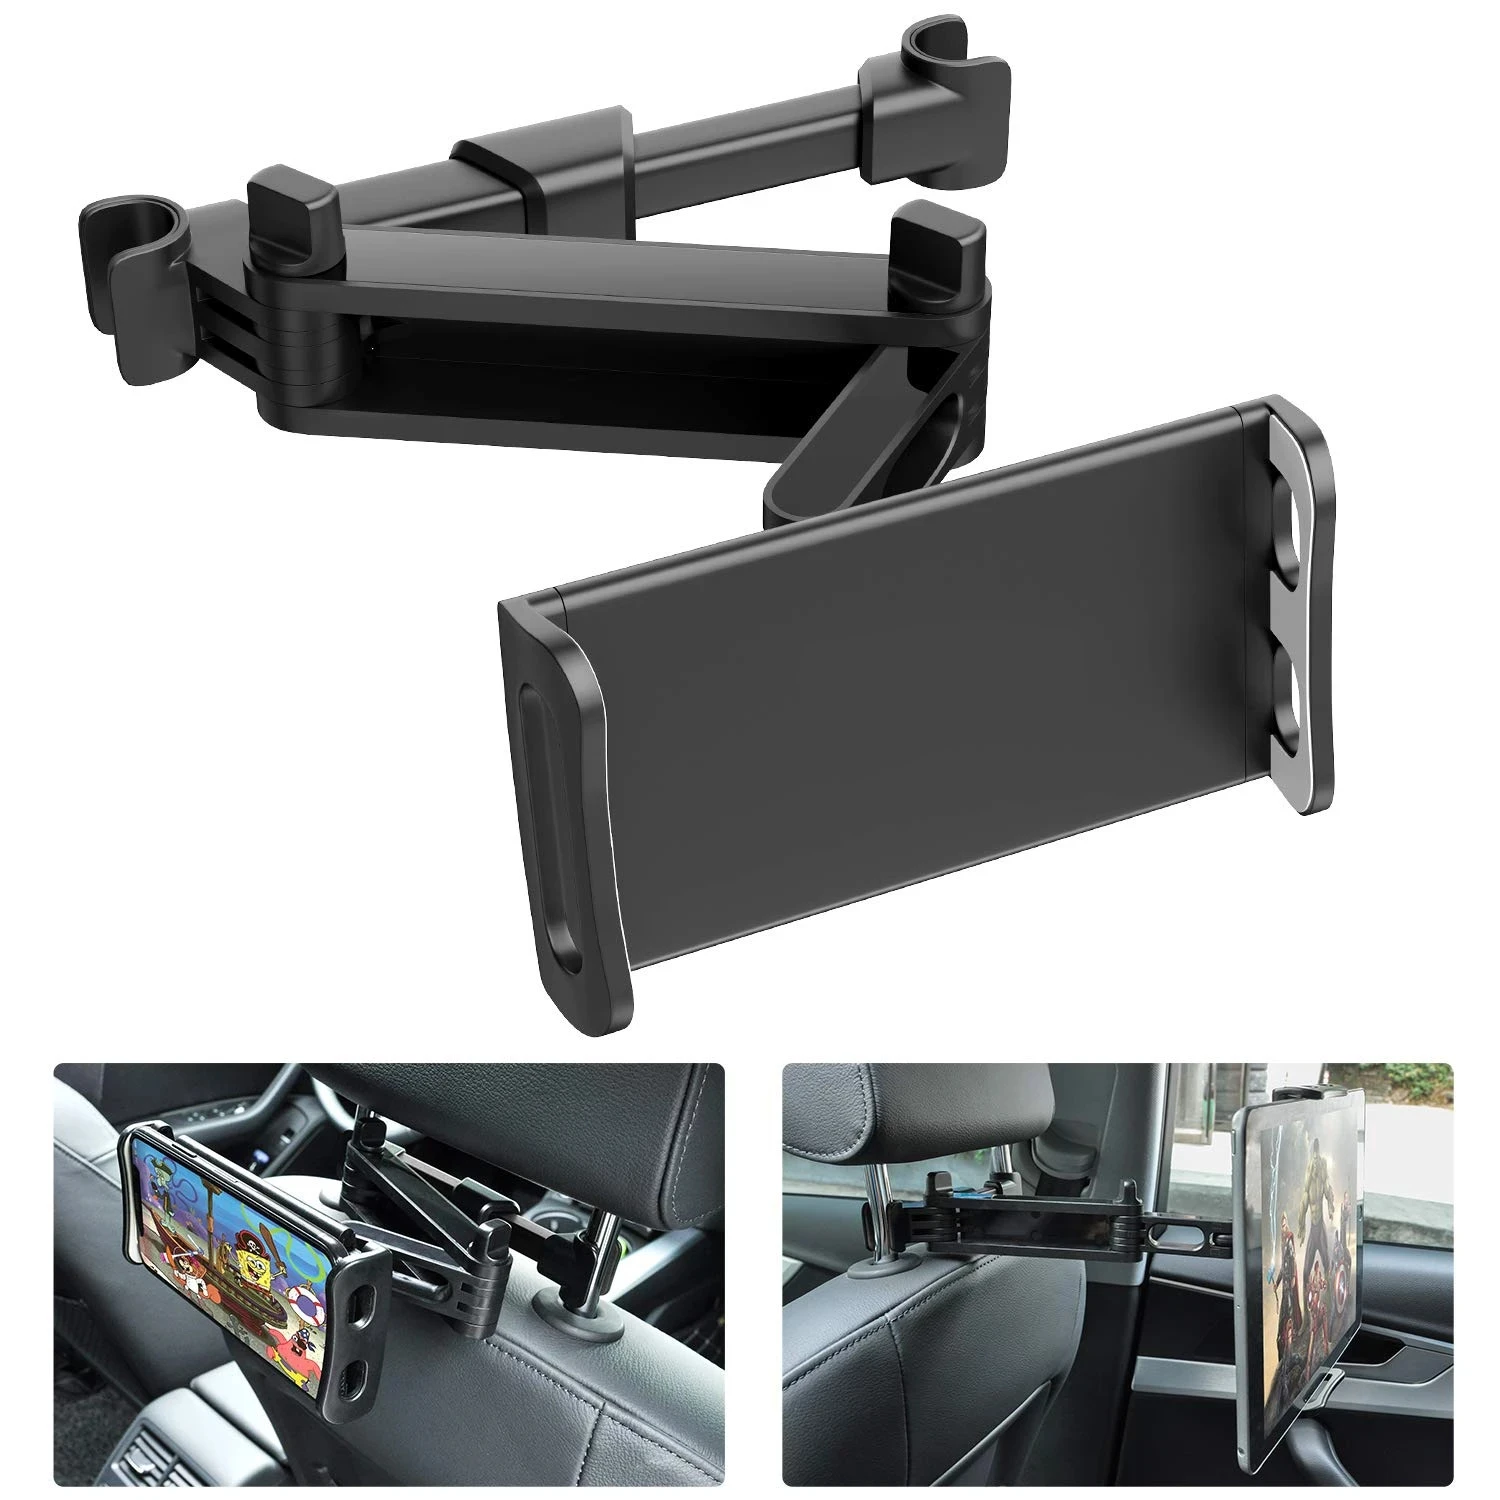 Hot sale Stand Seat Rear Headrest Mounting Bracket for Phone Tablet 4-11 Inch Telescopic Car Rear Pillow Phone Holder Tablet Car